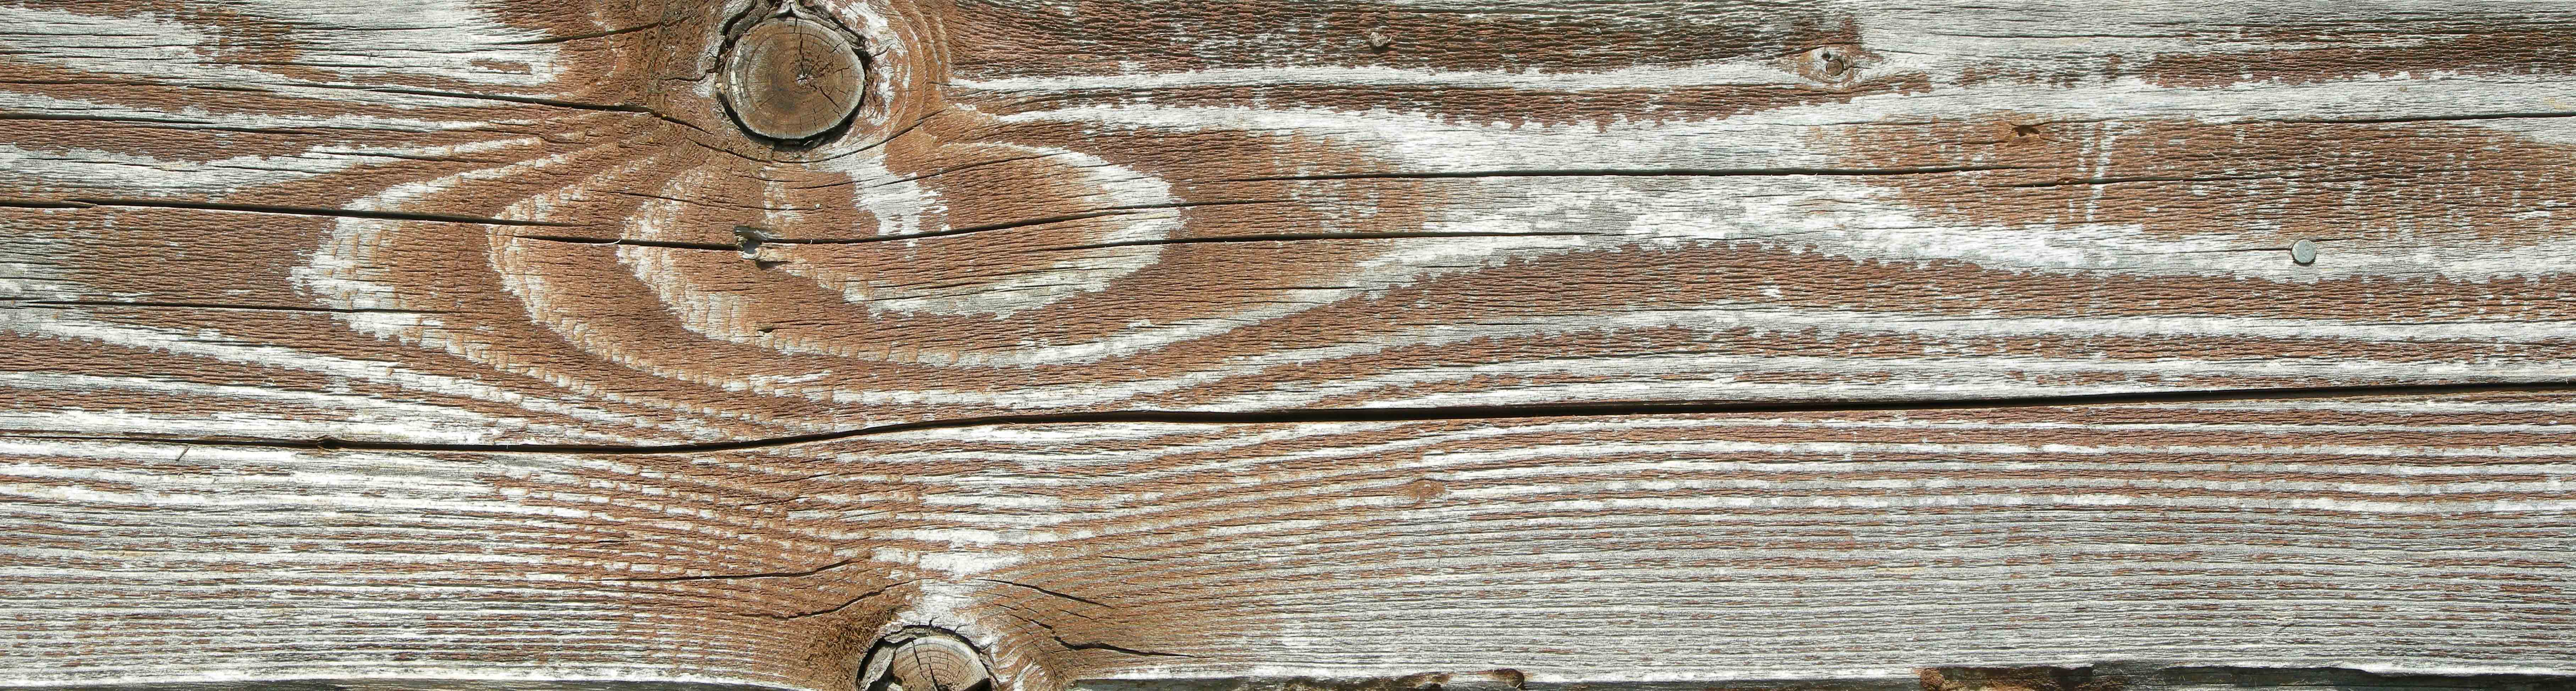 cracked wood plank download free textures